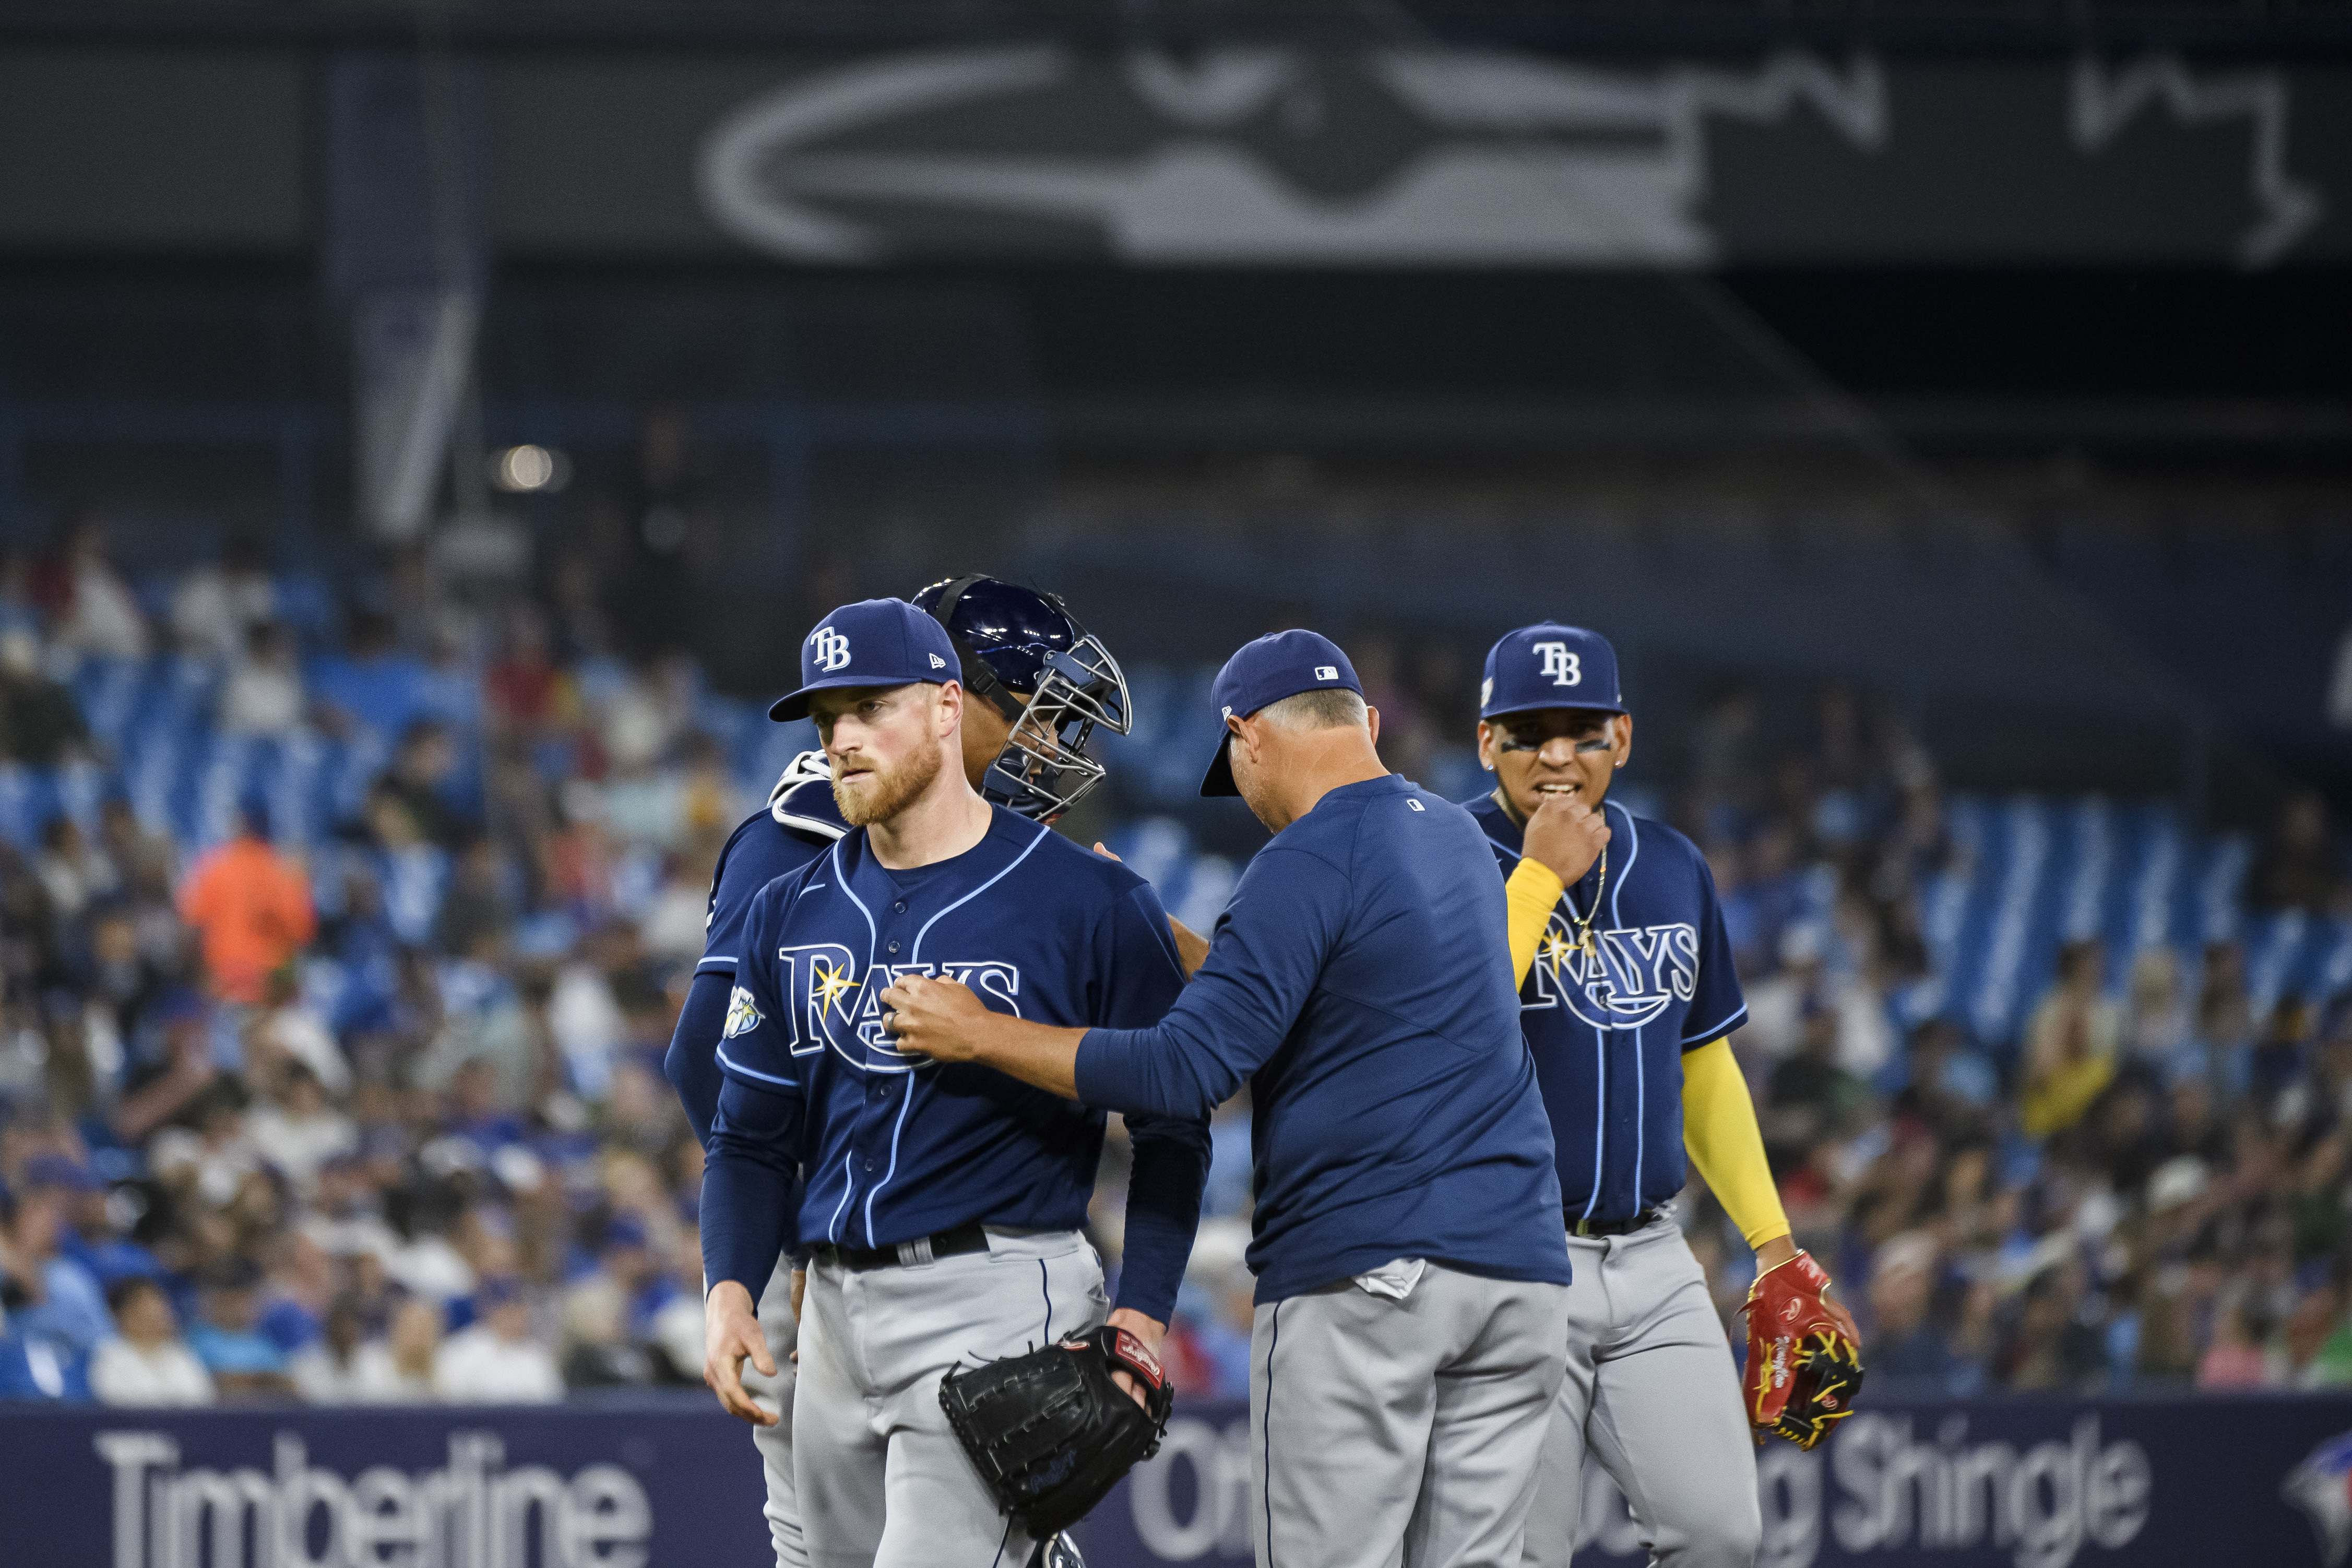 Yankees, Red Sox, Rays, Orioles, Blue Jays: The good, bad and injured